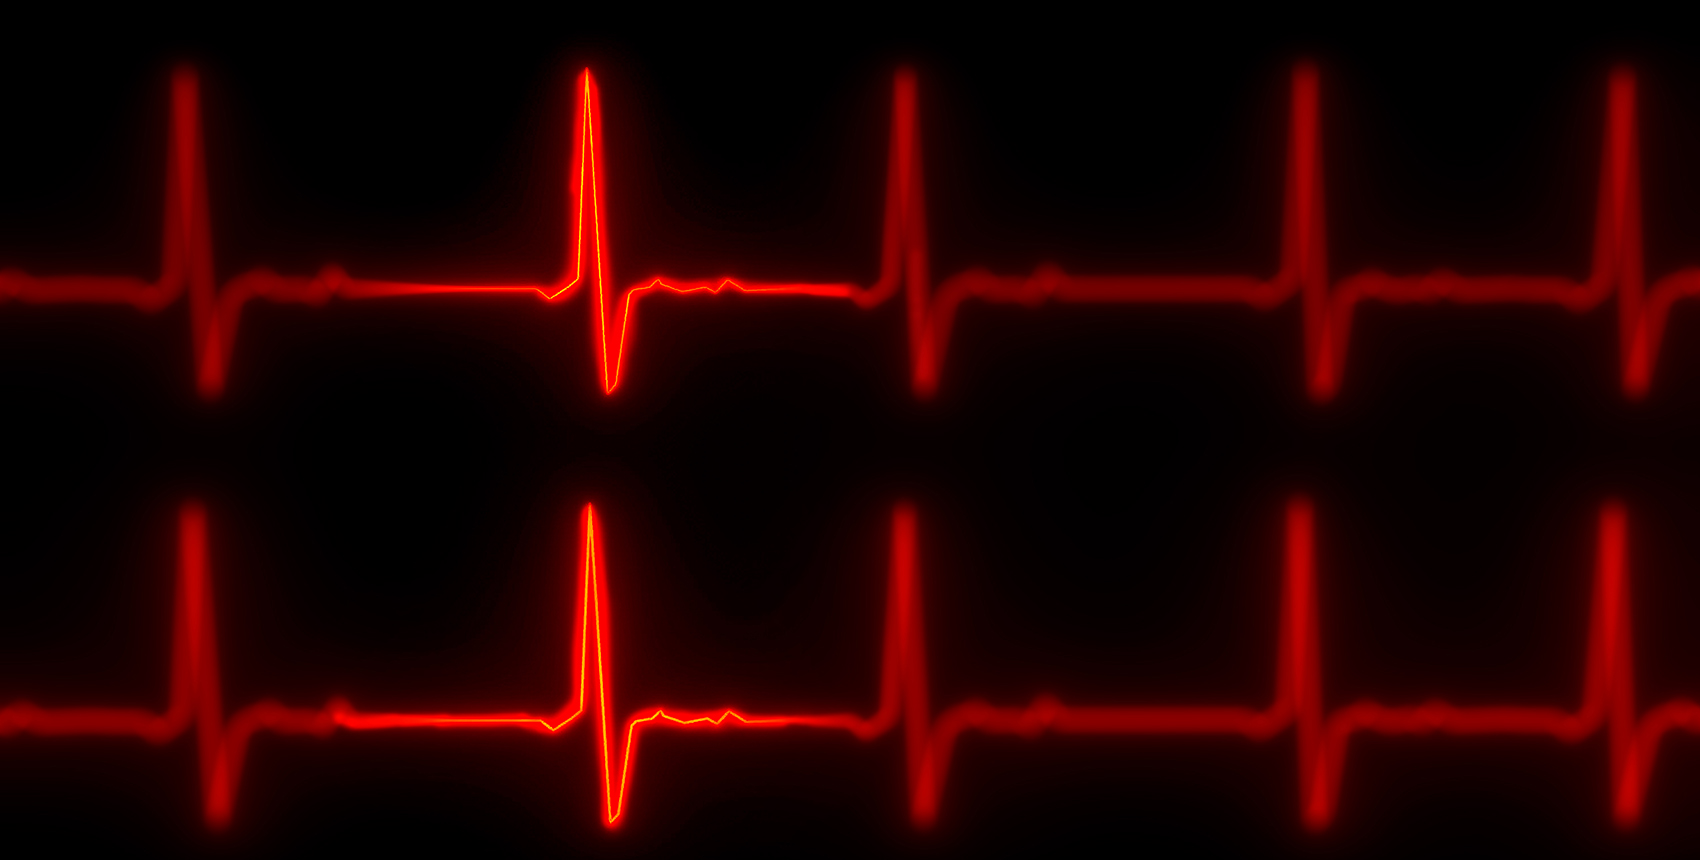 Two horizontal red lines punctuated with jagged peaks representing a heart beat on an electrocardiogram